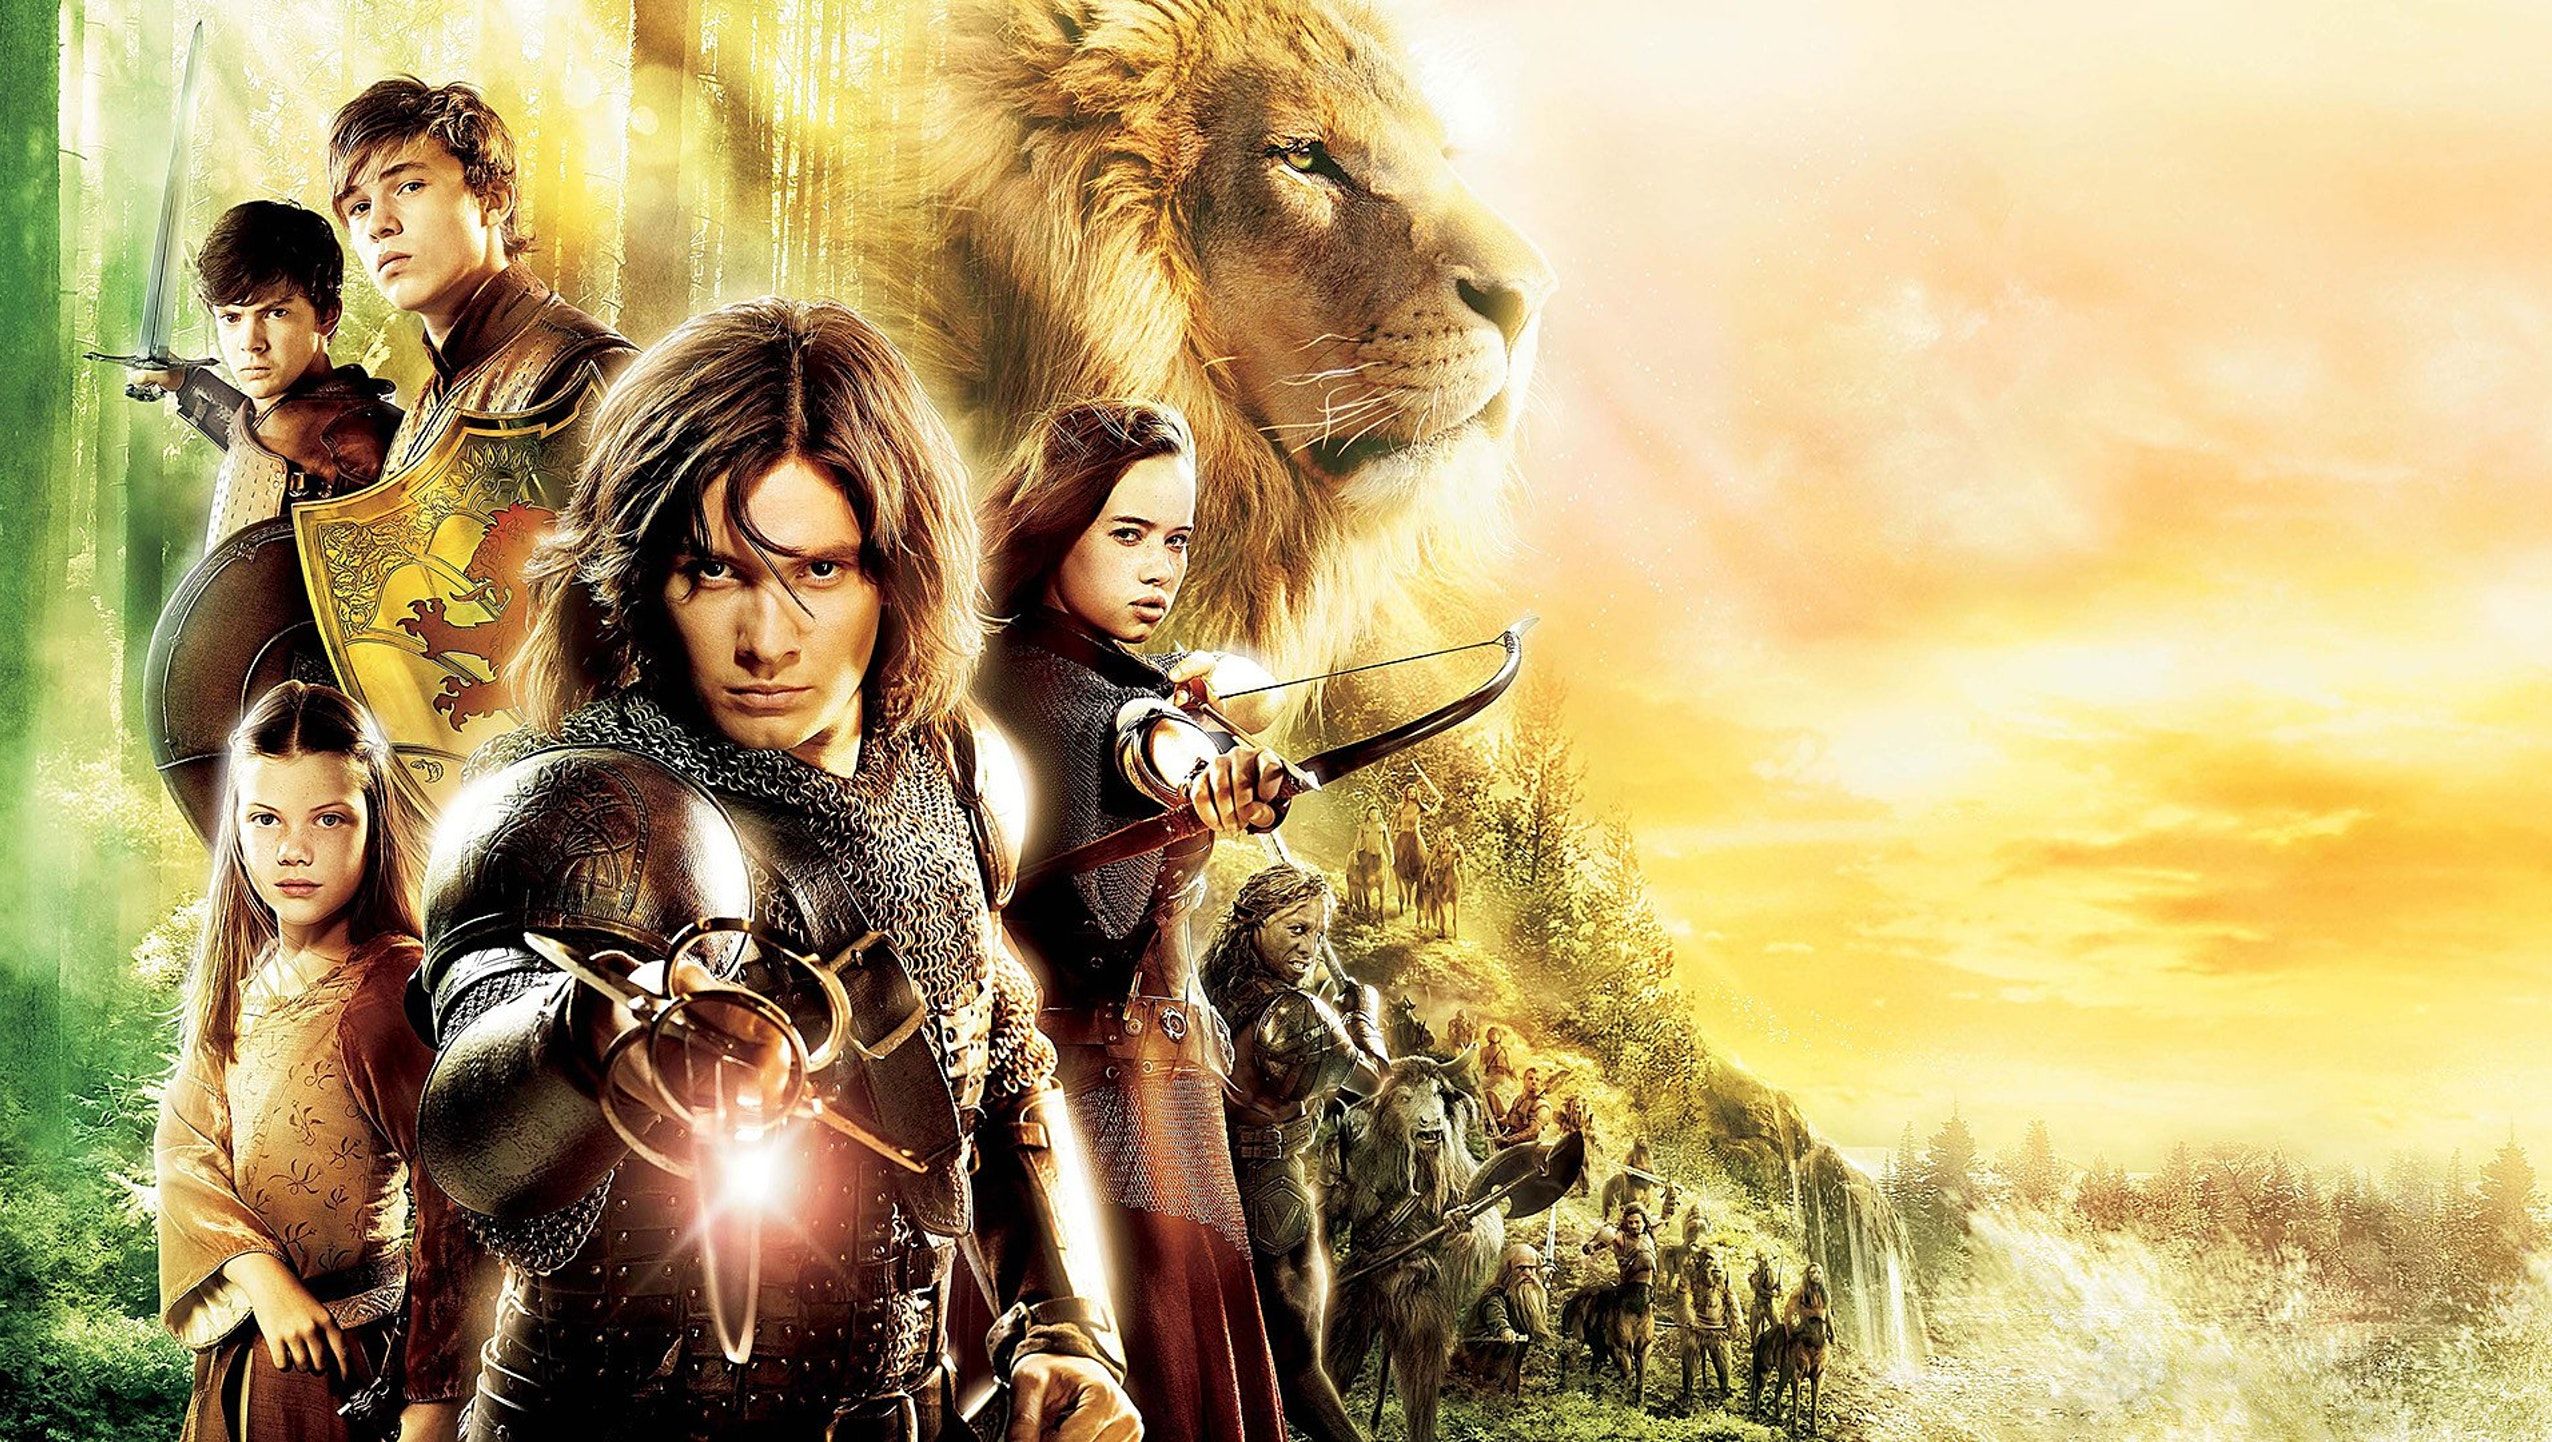 The Chronicles of Narnia: Prince Caspian (2008) Desktop Wallpaper. Moviemania. Narnia prince caspian, Chronicles of narnia, Prince caspian